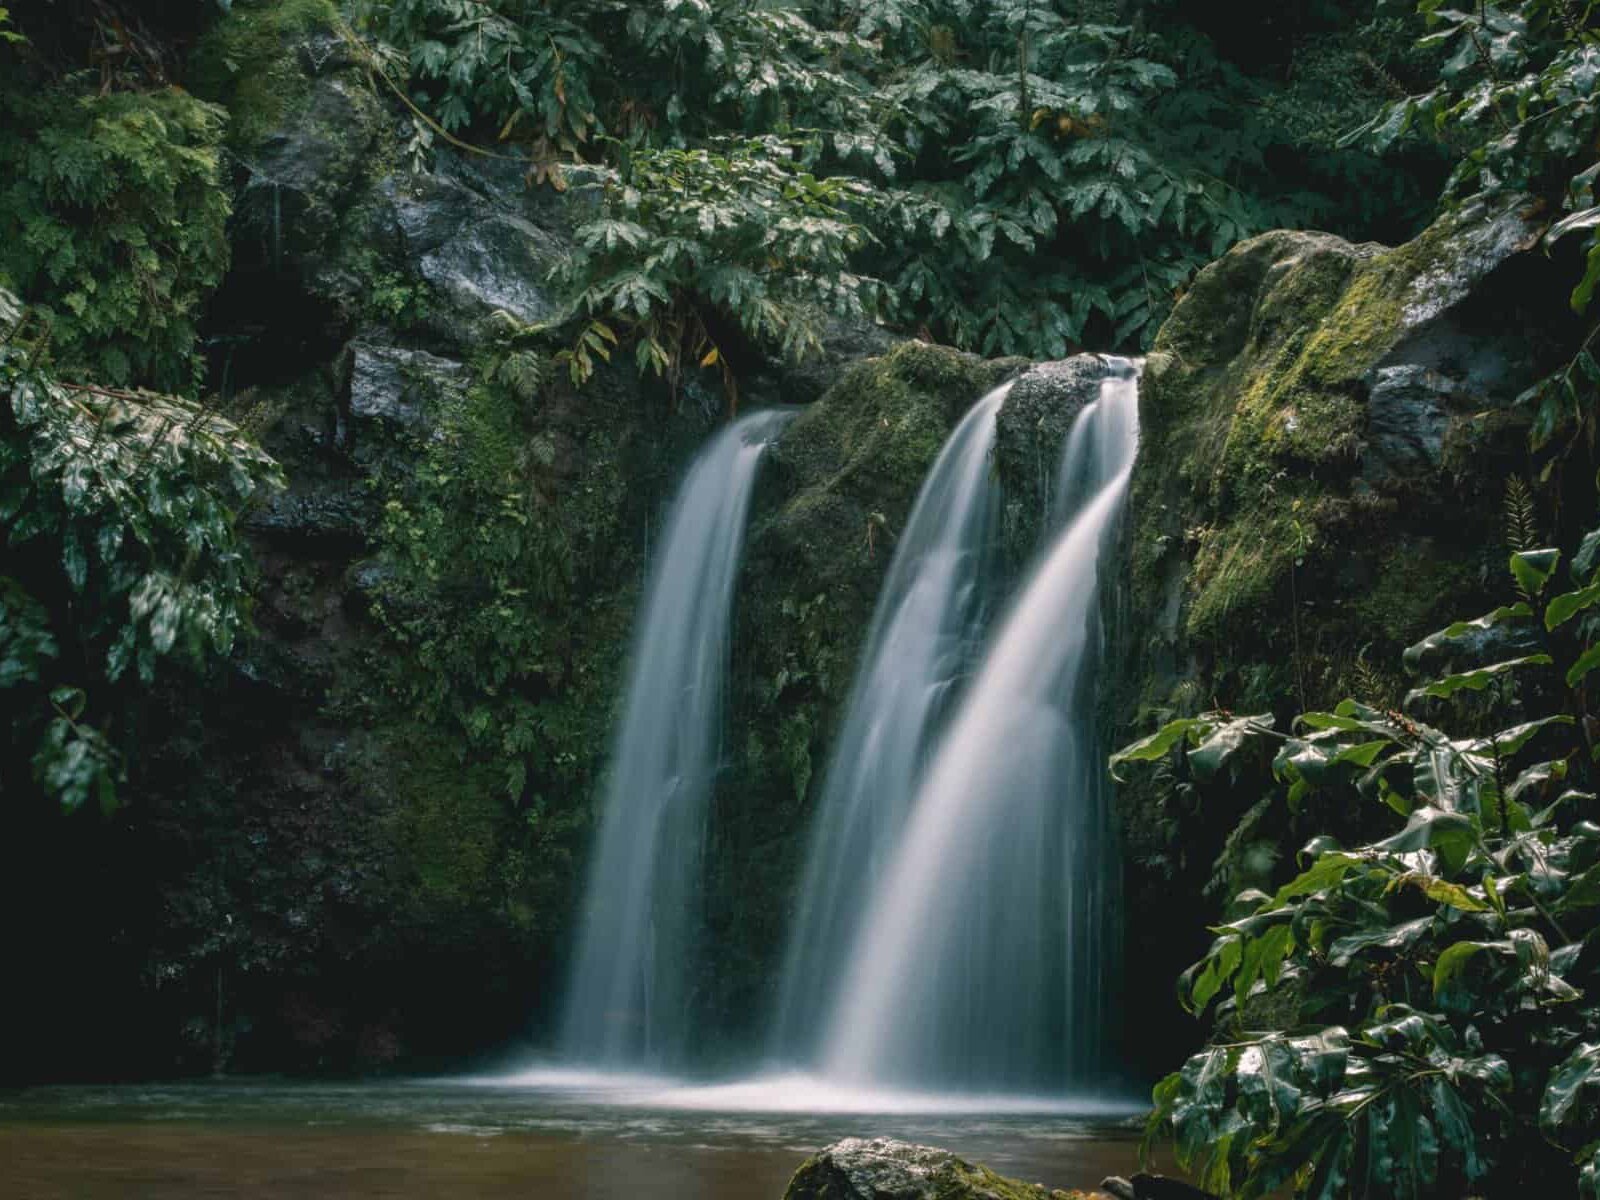 A majestic waterfall deep in the Azores